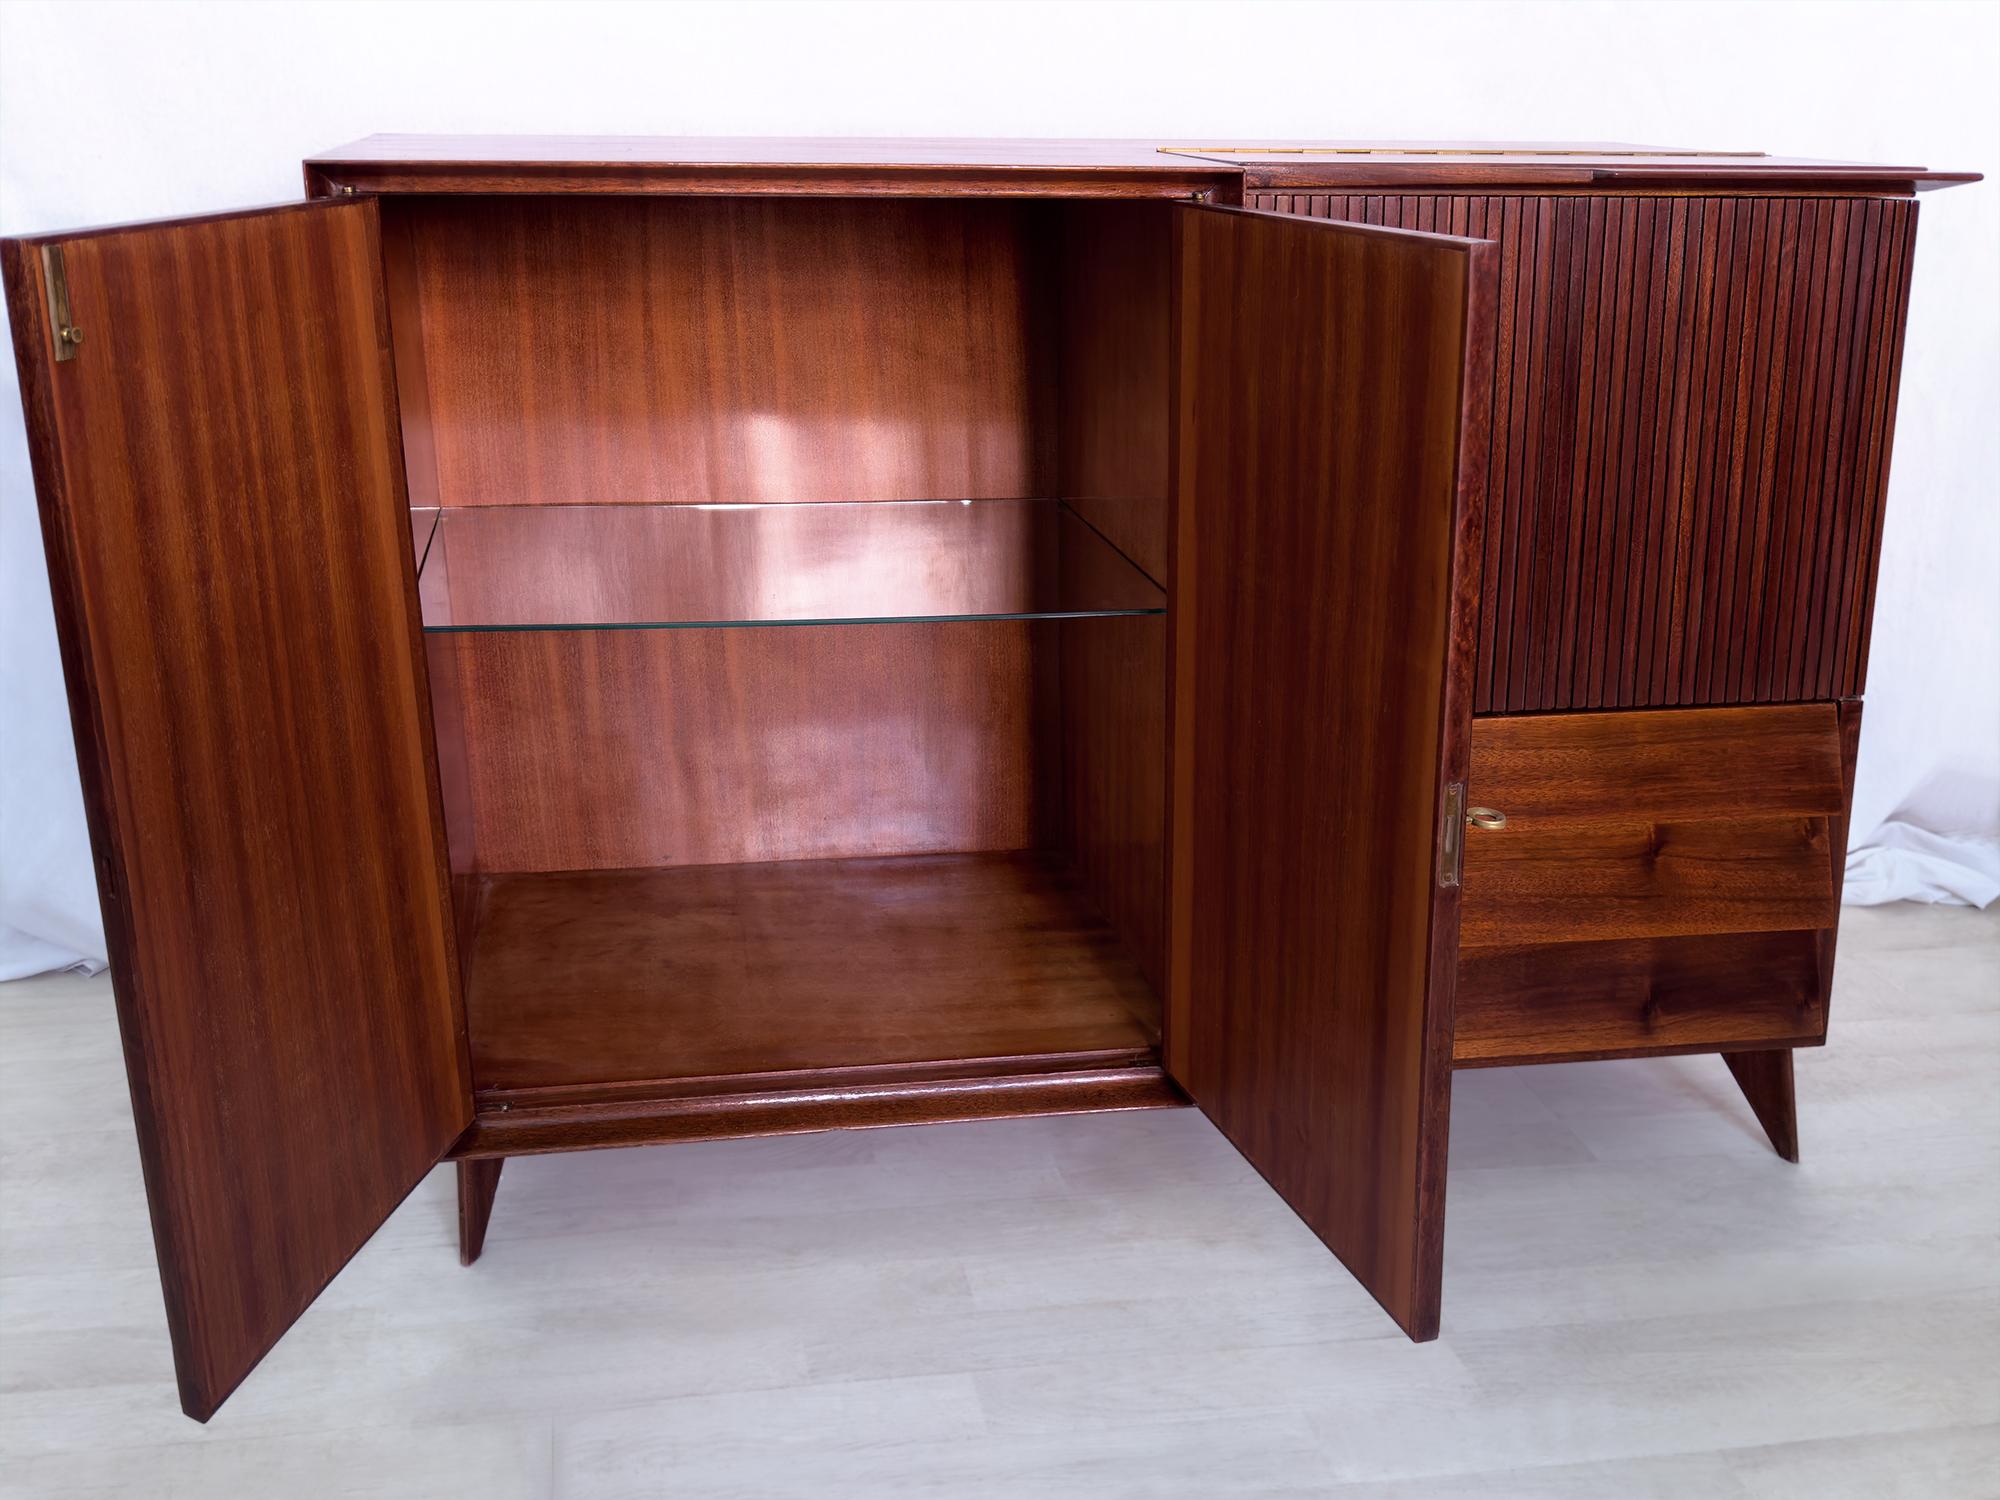 Italian Mid-Century Teak Wood Sideboard with Bar Cabinet by Vittorio Dassi, 1950s For Sale 13